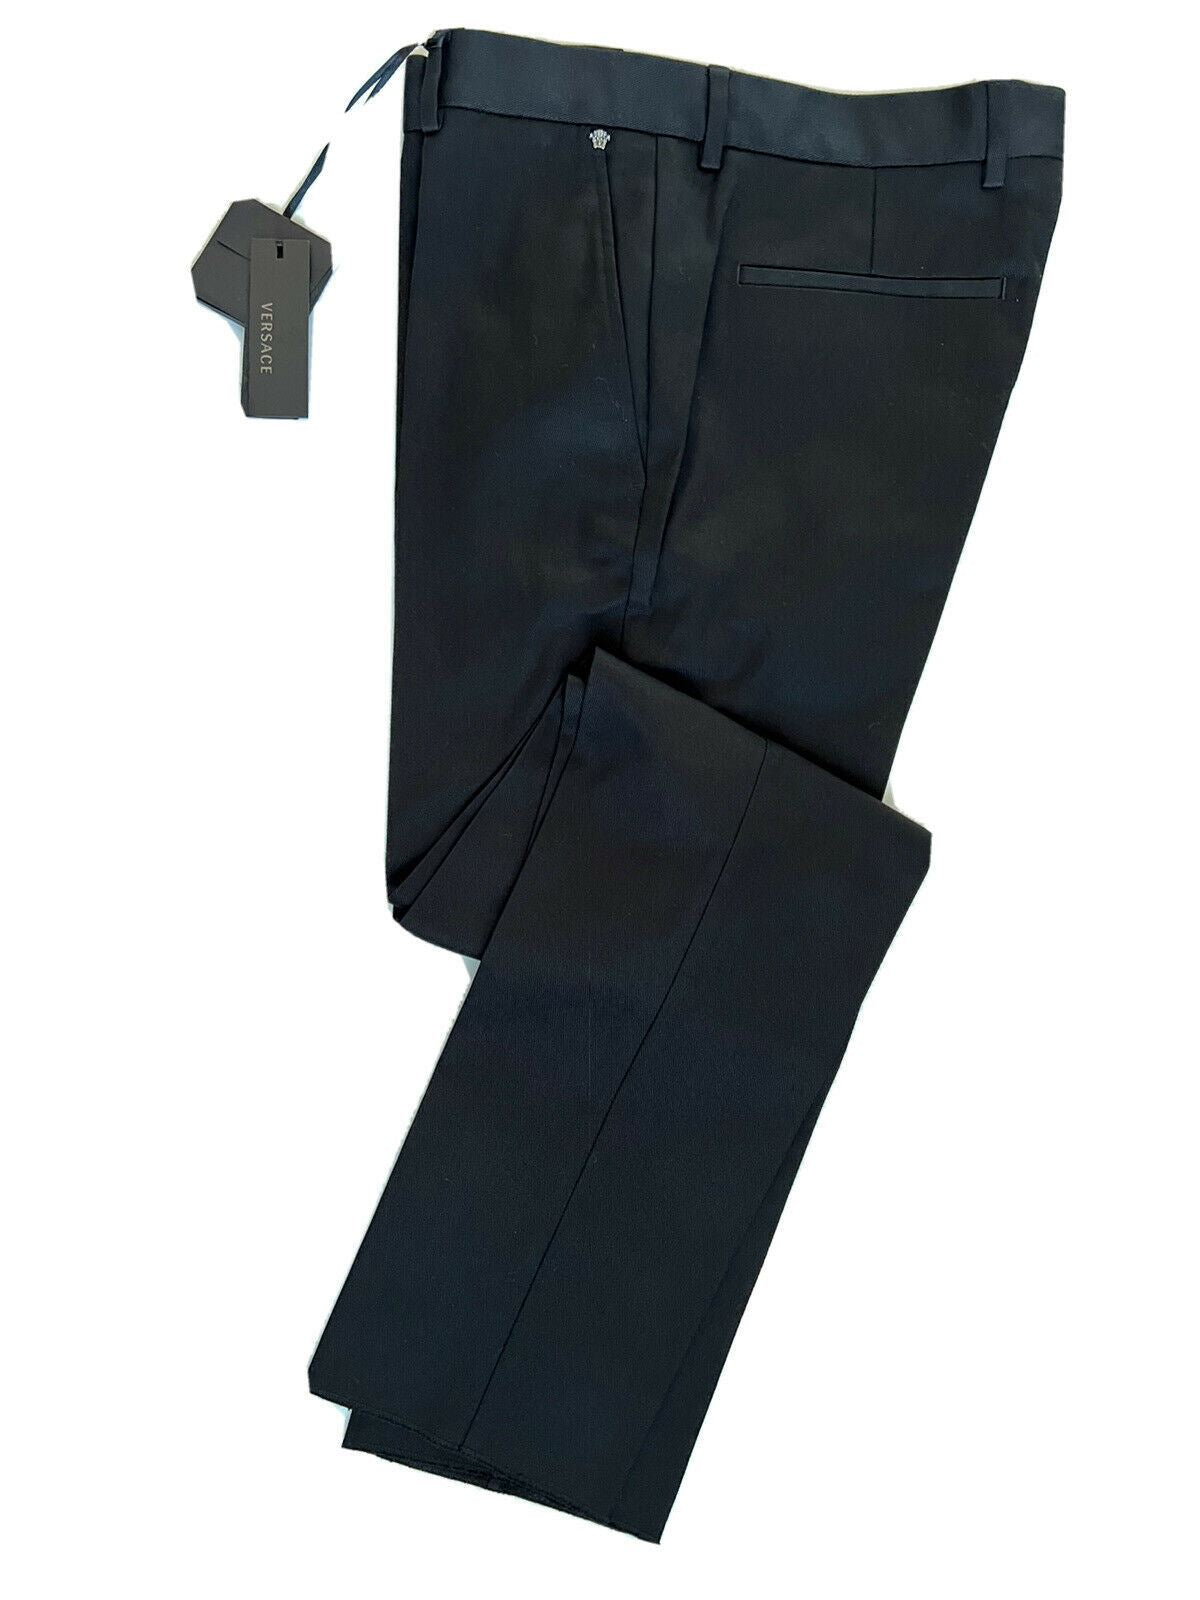 NWT $550 Versace Men's Black Pants 36 US (52 Euro) Made in Italy A79901